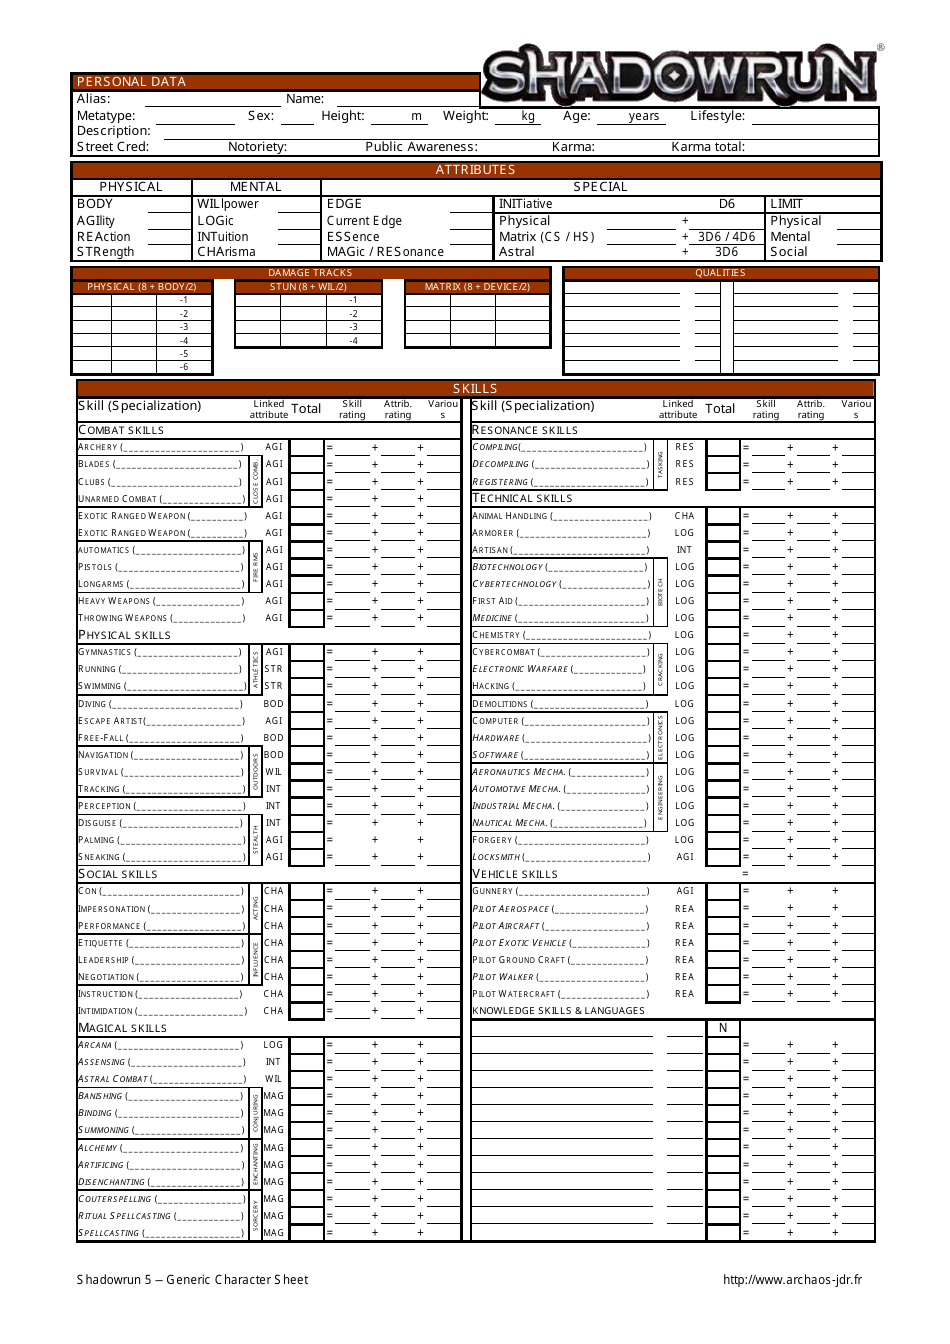 Shadowrun 5 Generic Character Sheet Image Preview